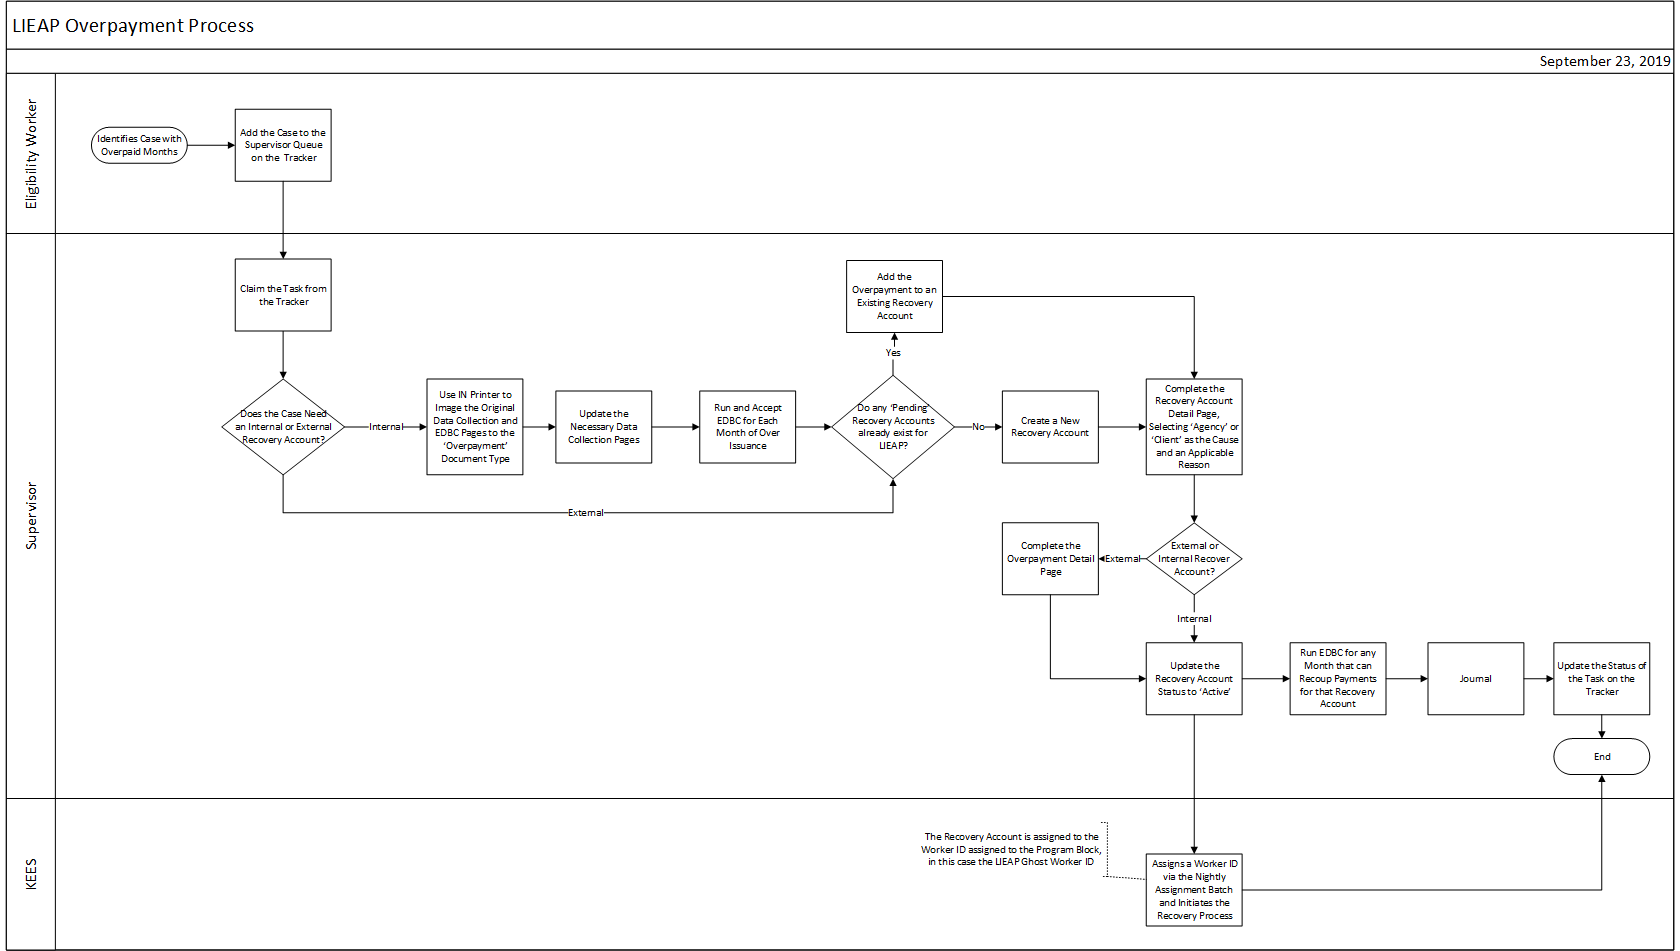 This flowchart reflects information in the text below.